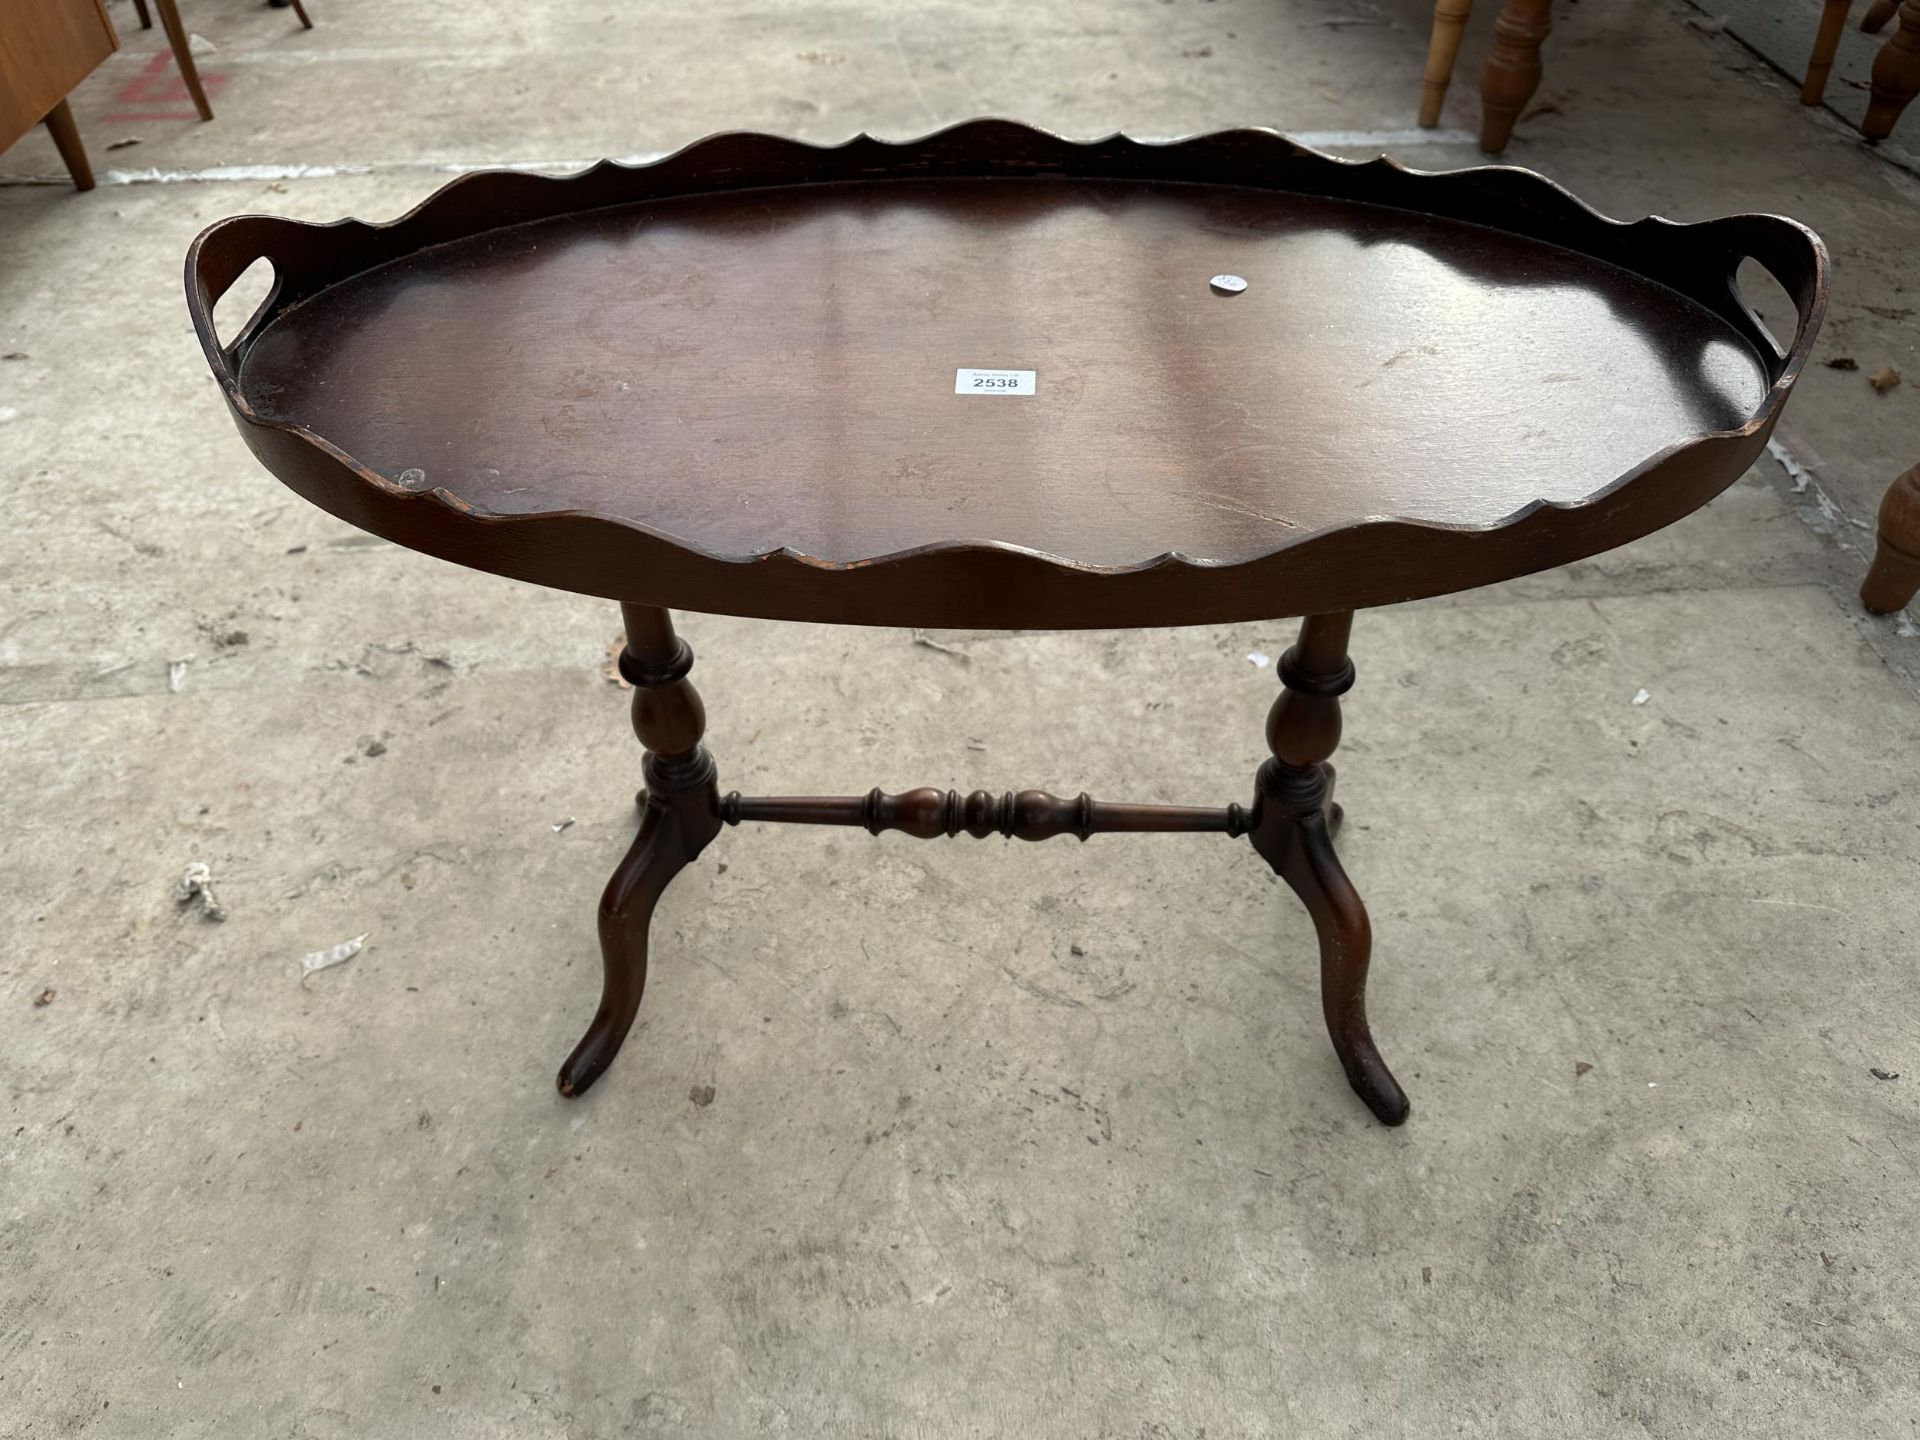 AN OVAL OCCASIONAL TABLE WITH CARRYING HANDLE ON A PEDESTAL FRAME